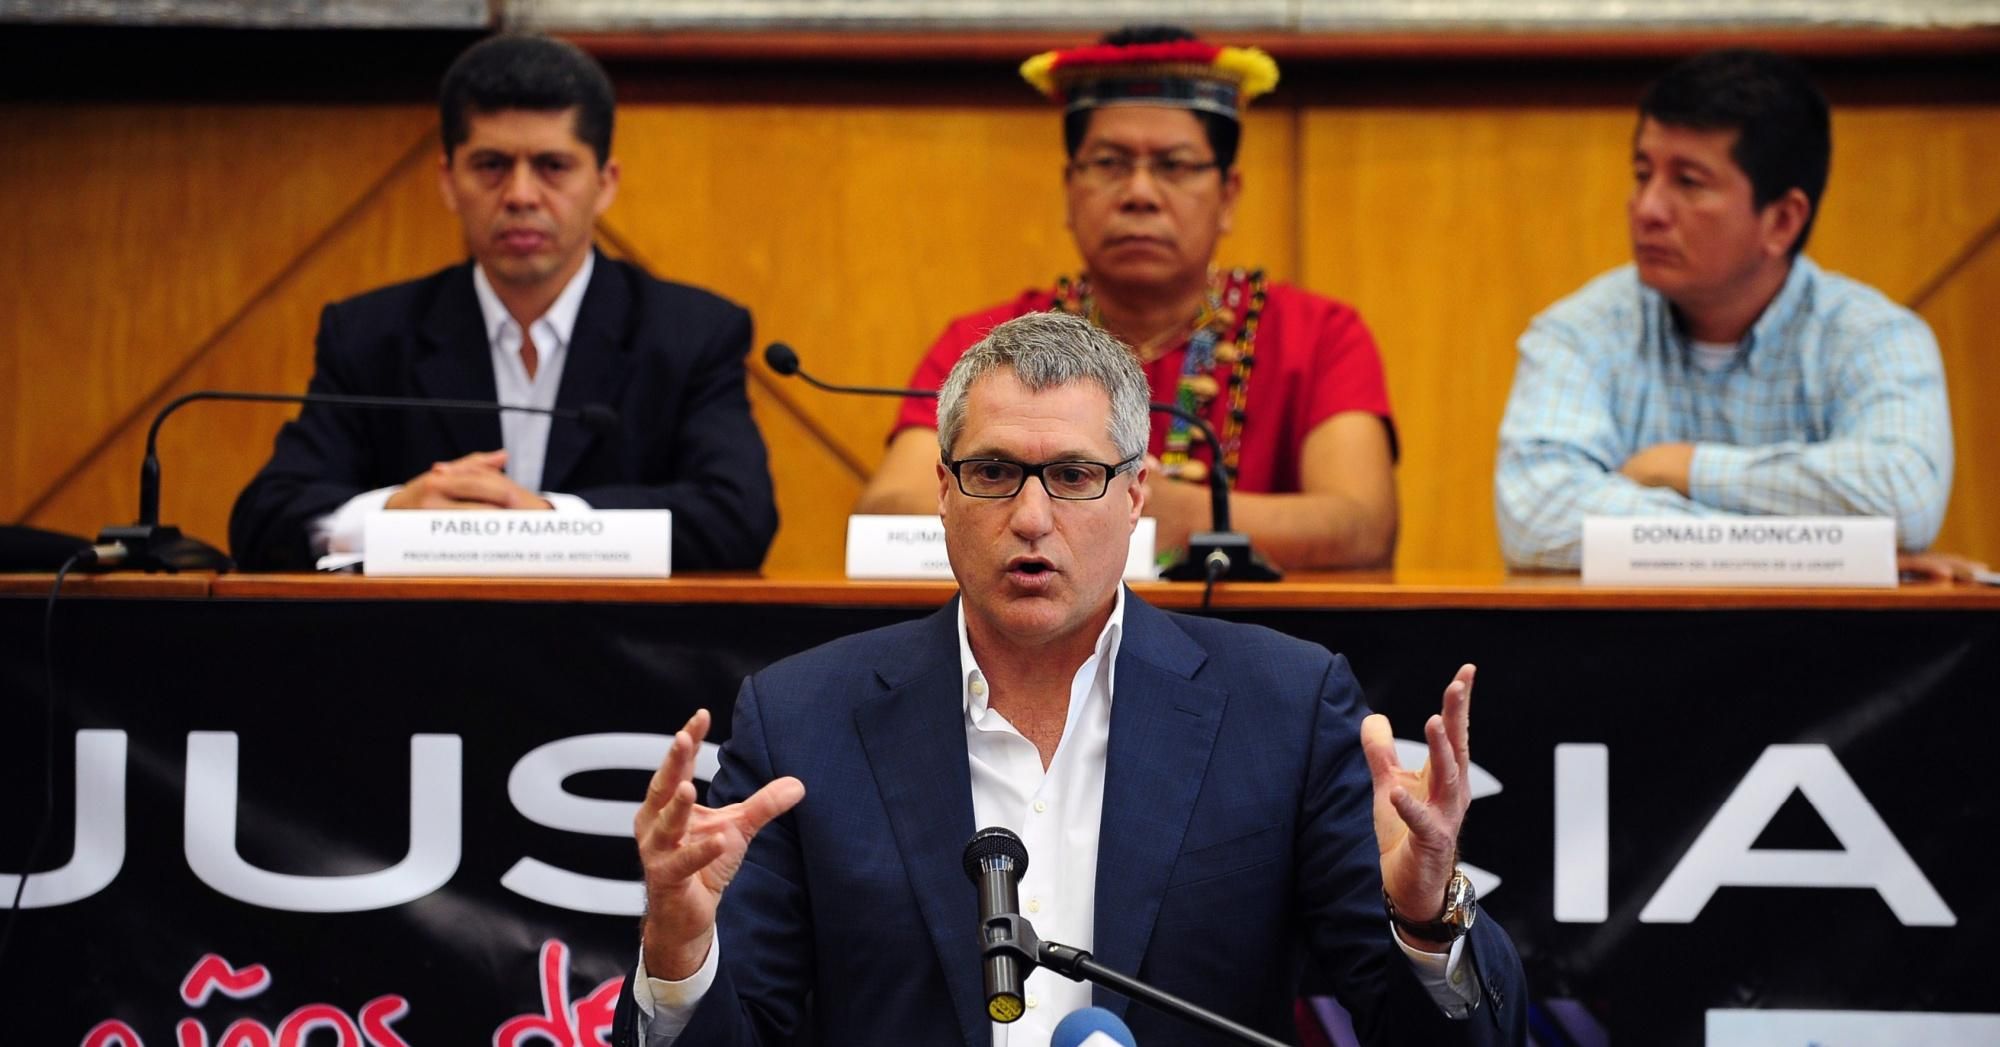 Steven Donziger, a human rights lawyer working of behalf of Ecuadorians harmed by over three decades of Texaco-Chevron's oil drilling and dumping of toxic wastewater in the Amazon rainforest, speaks at a press conference on March 19, 2014 in Quito. (Photo: Rodrigo Buendia/AFP via Getty Images)